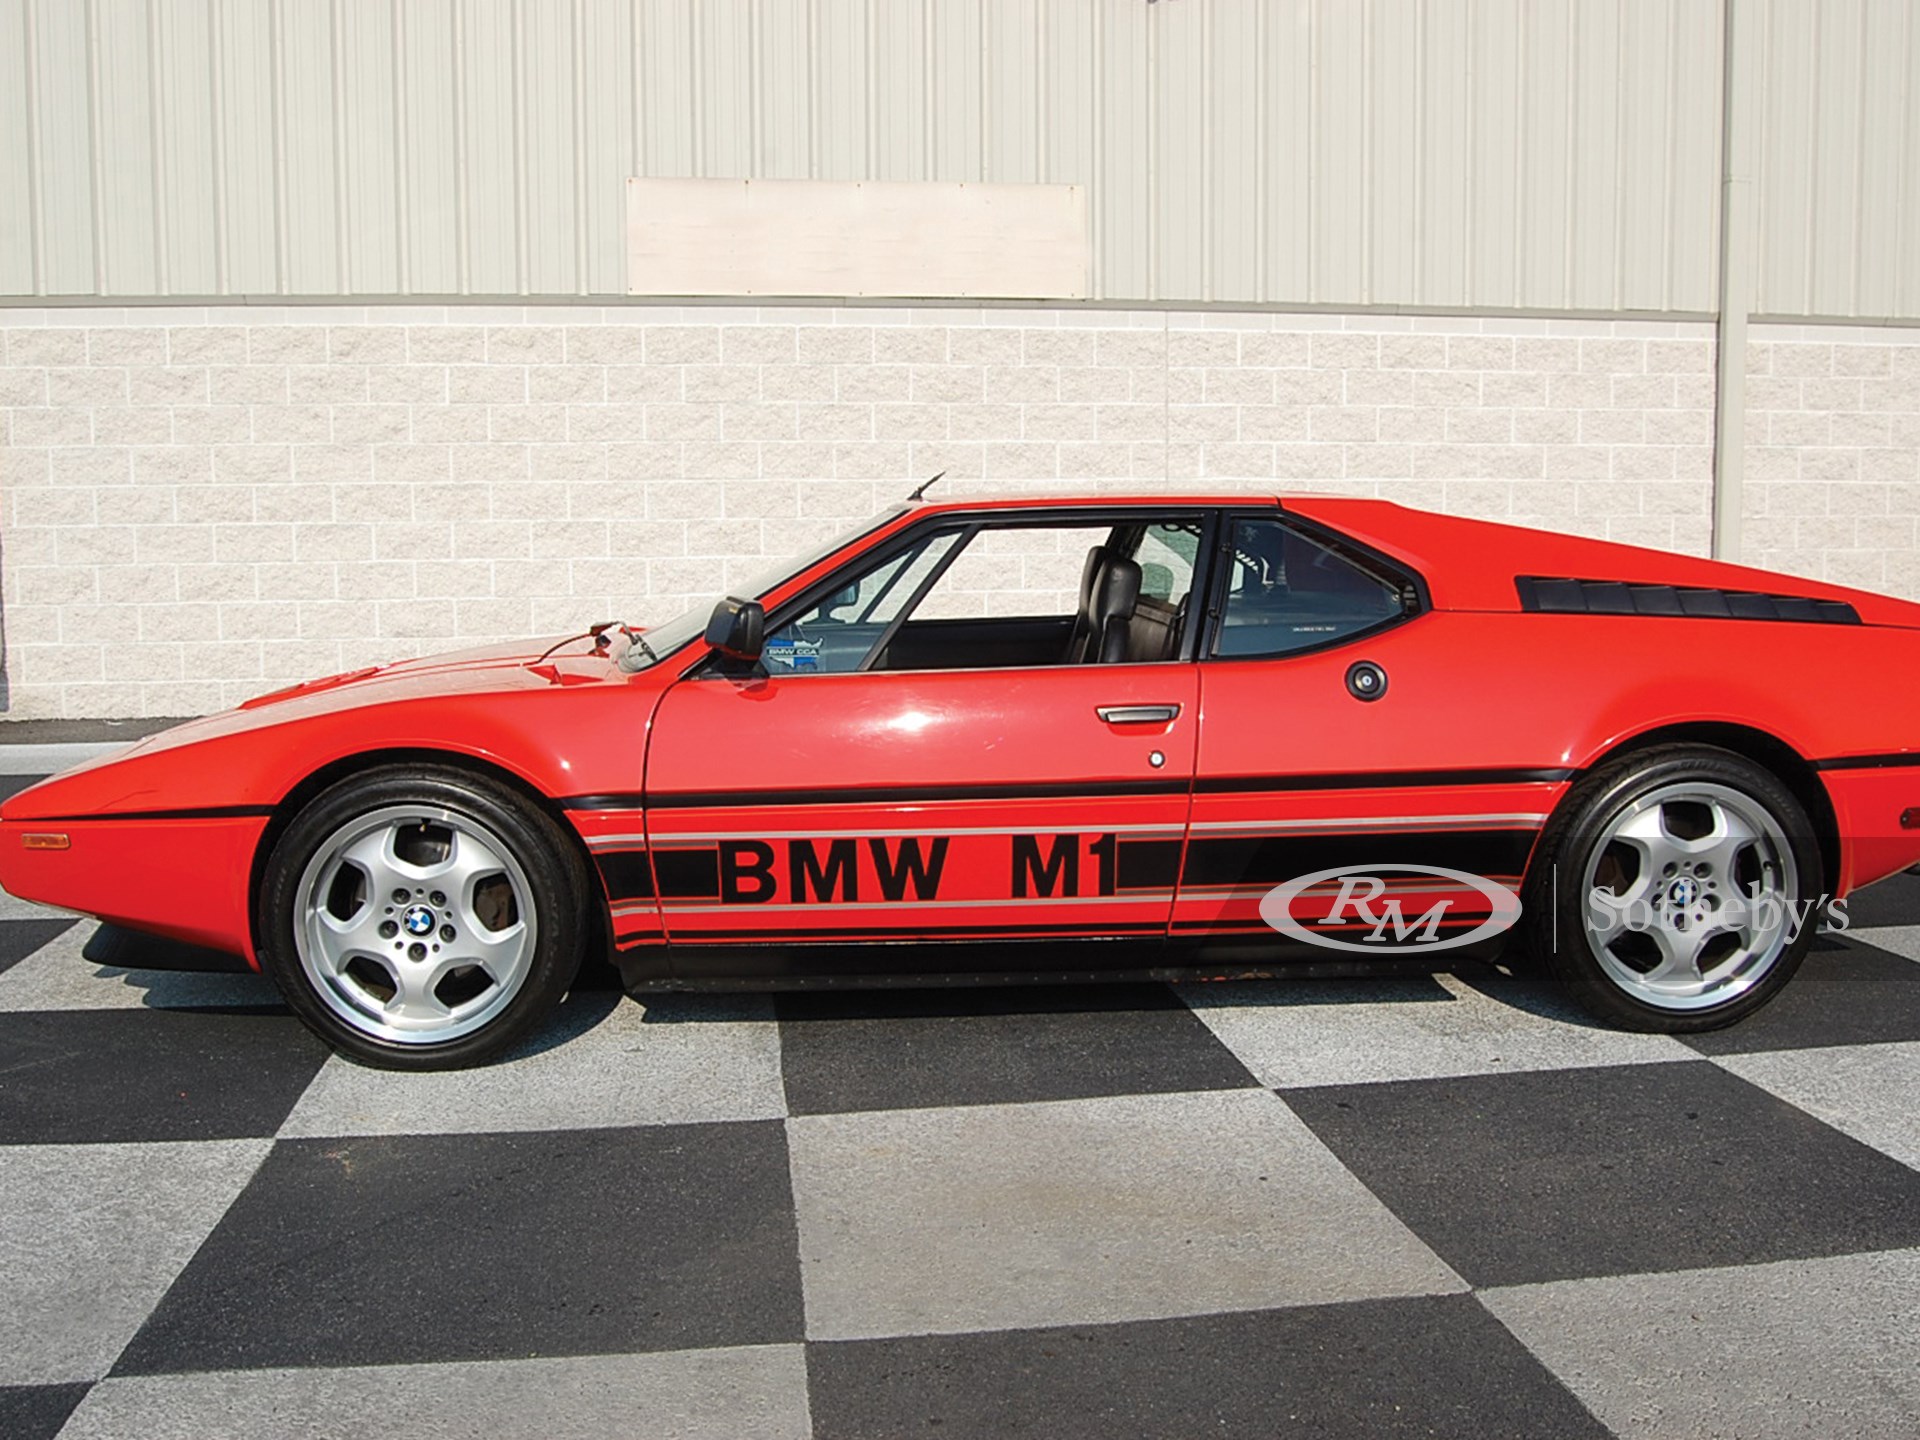 1980 BMW MI | Vintage Motor Cars of Hershey 2010 | RM Auctions